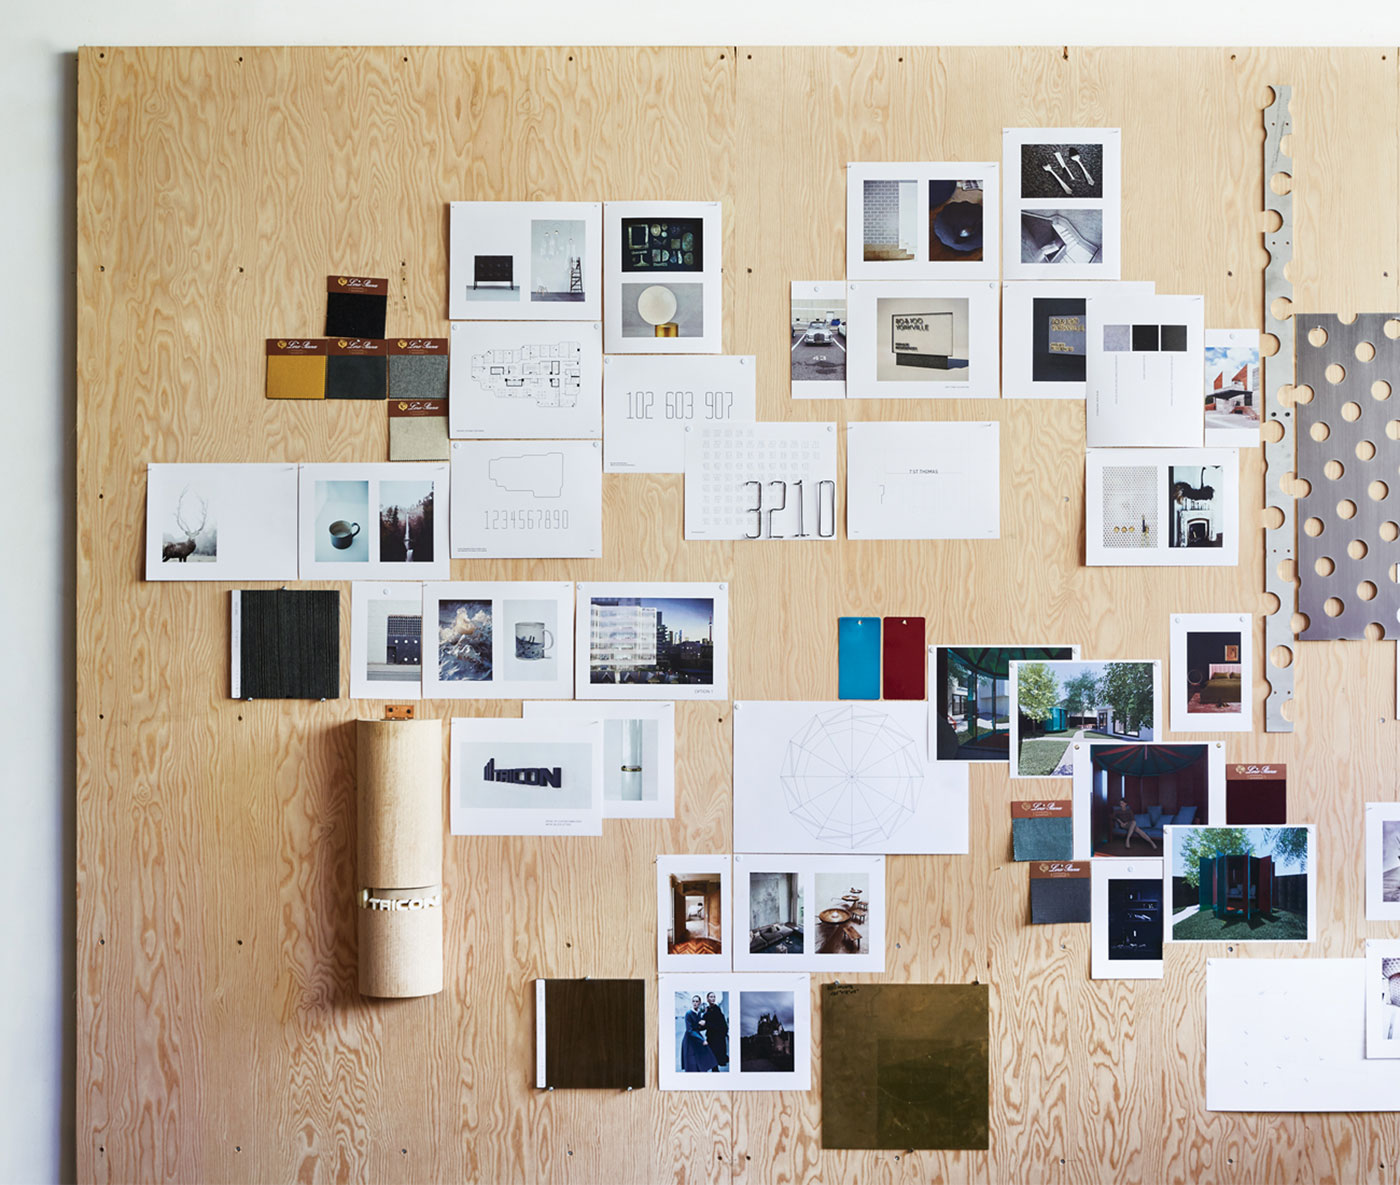 A giant mood board collects avant-garde inspiration, renderings for on-the-go projects, and material samples.